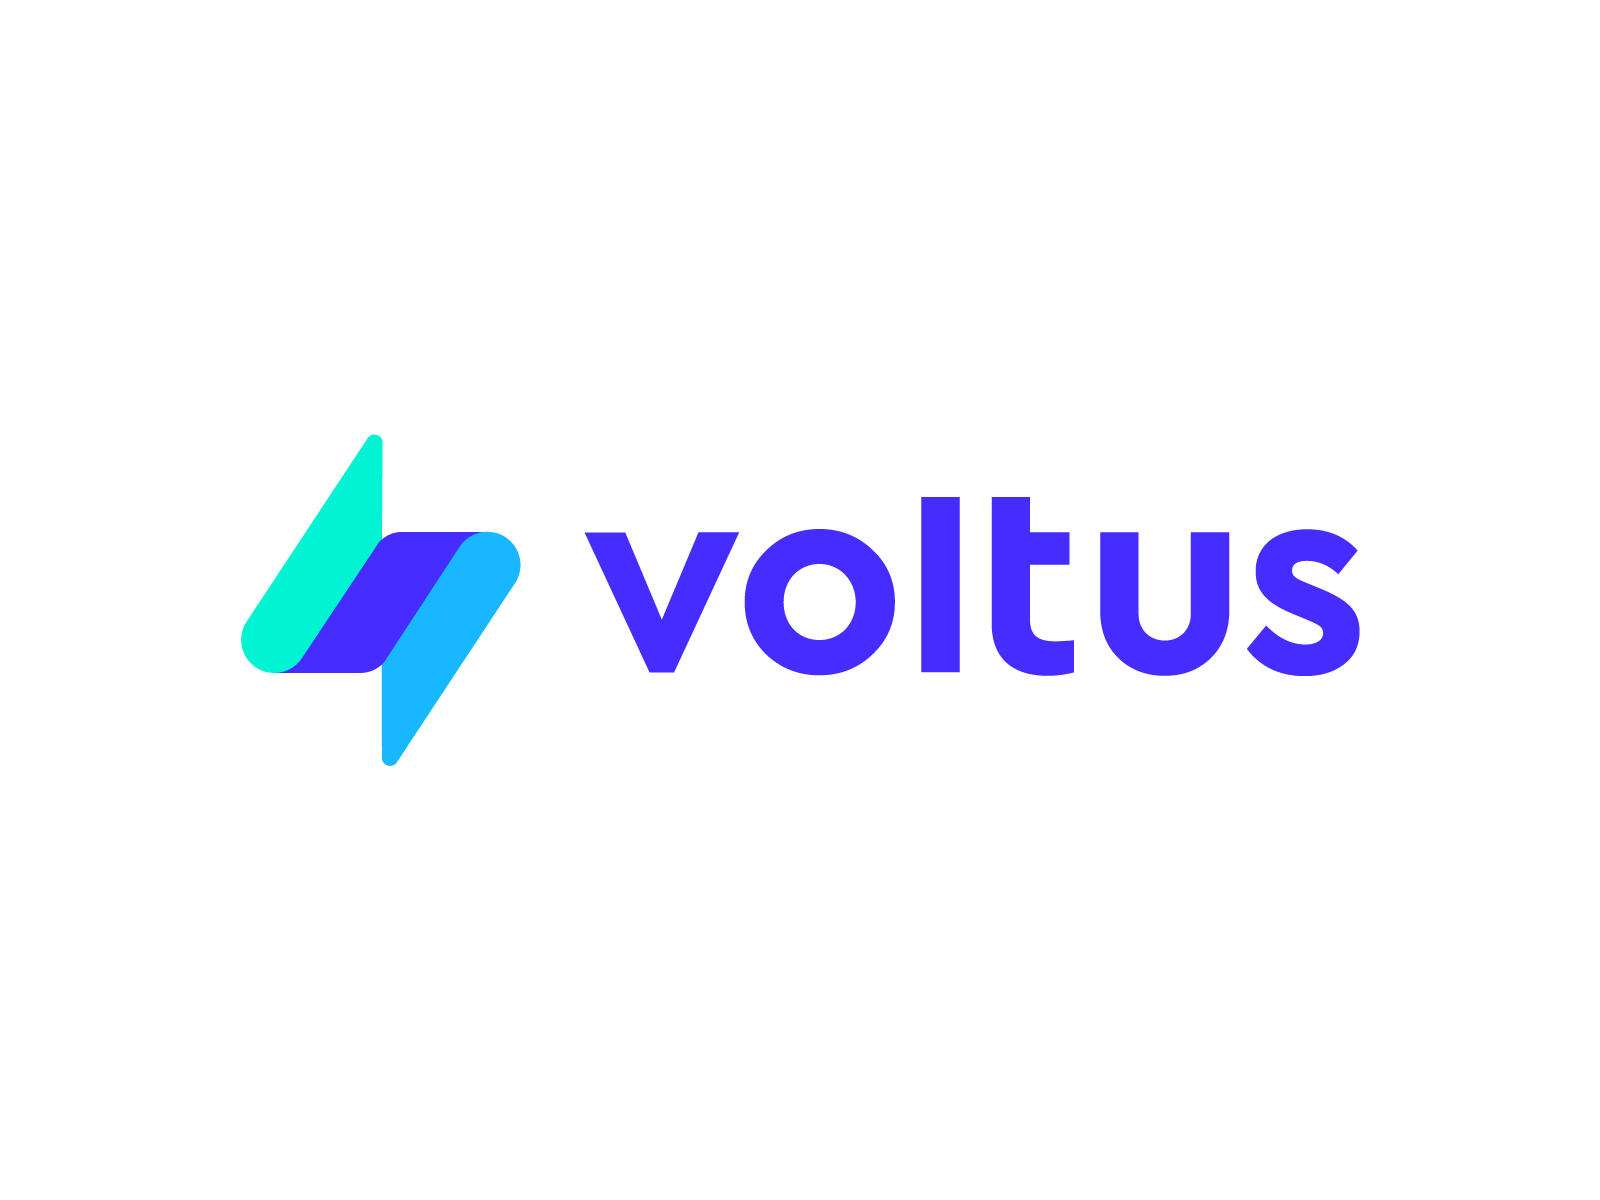 India's Tata mulls sale of Voltas home appliances business -Bloomberg News